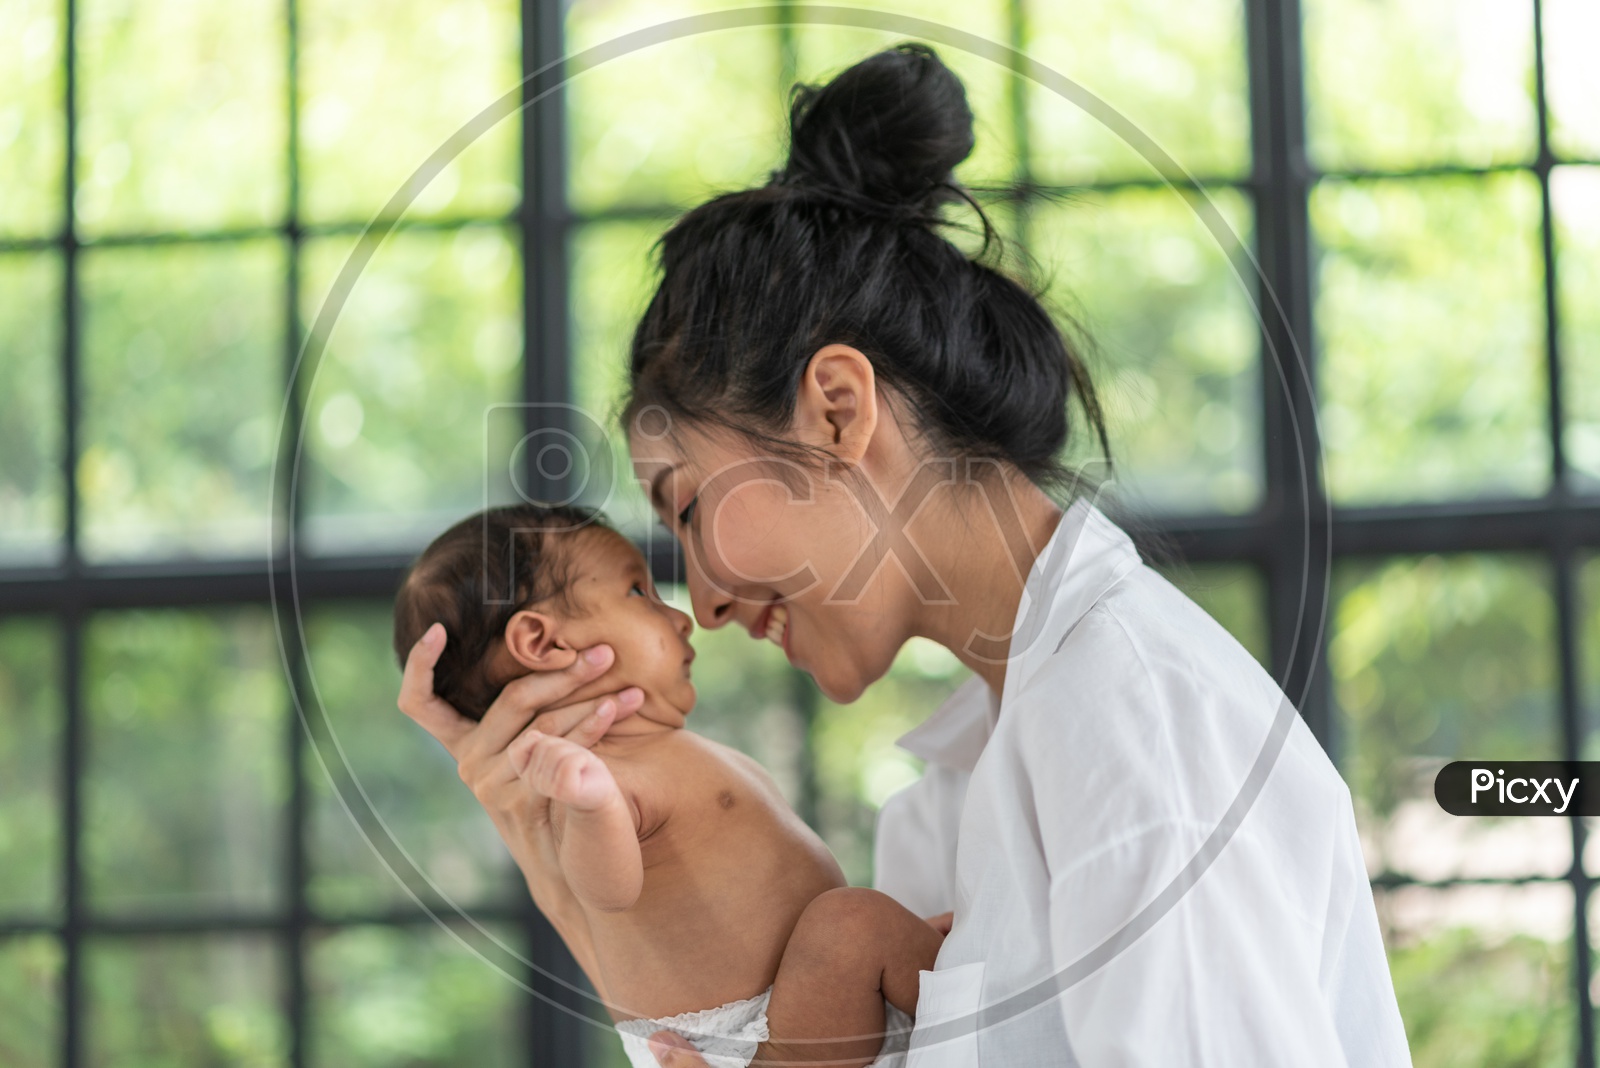 A young Asian mother holding a baby